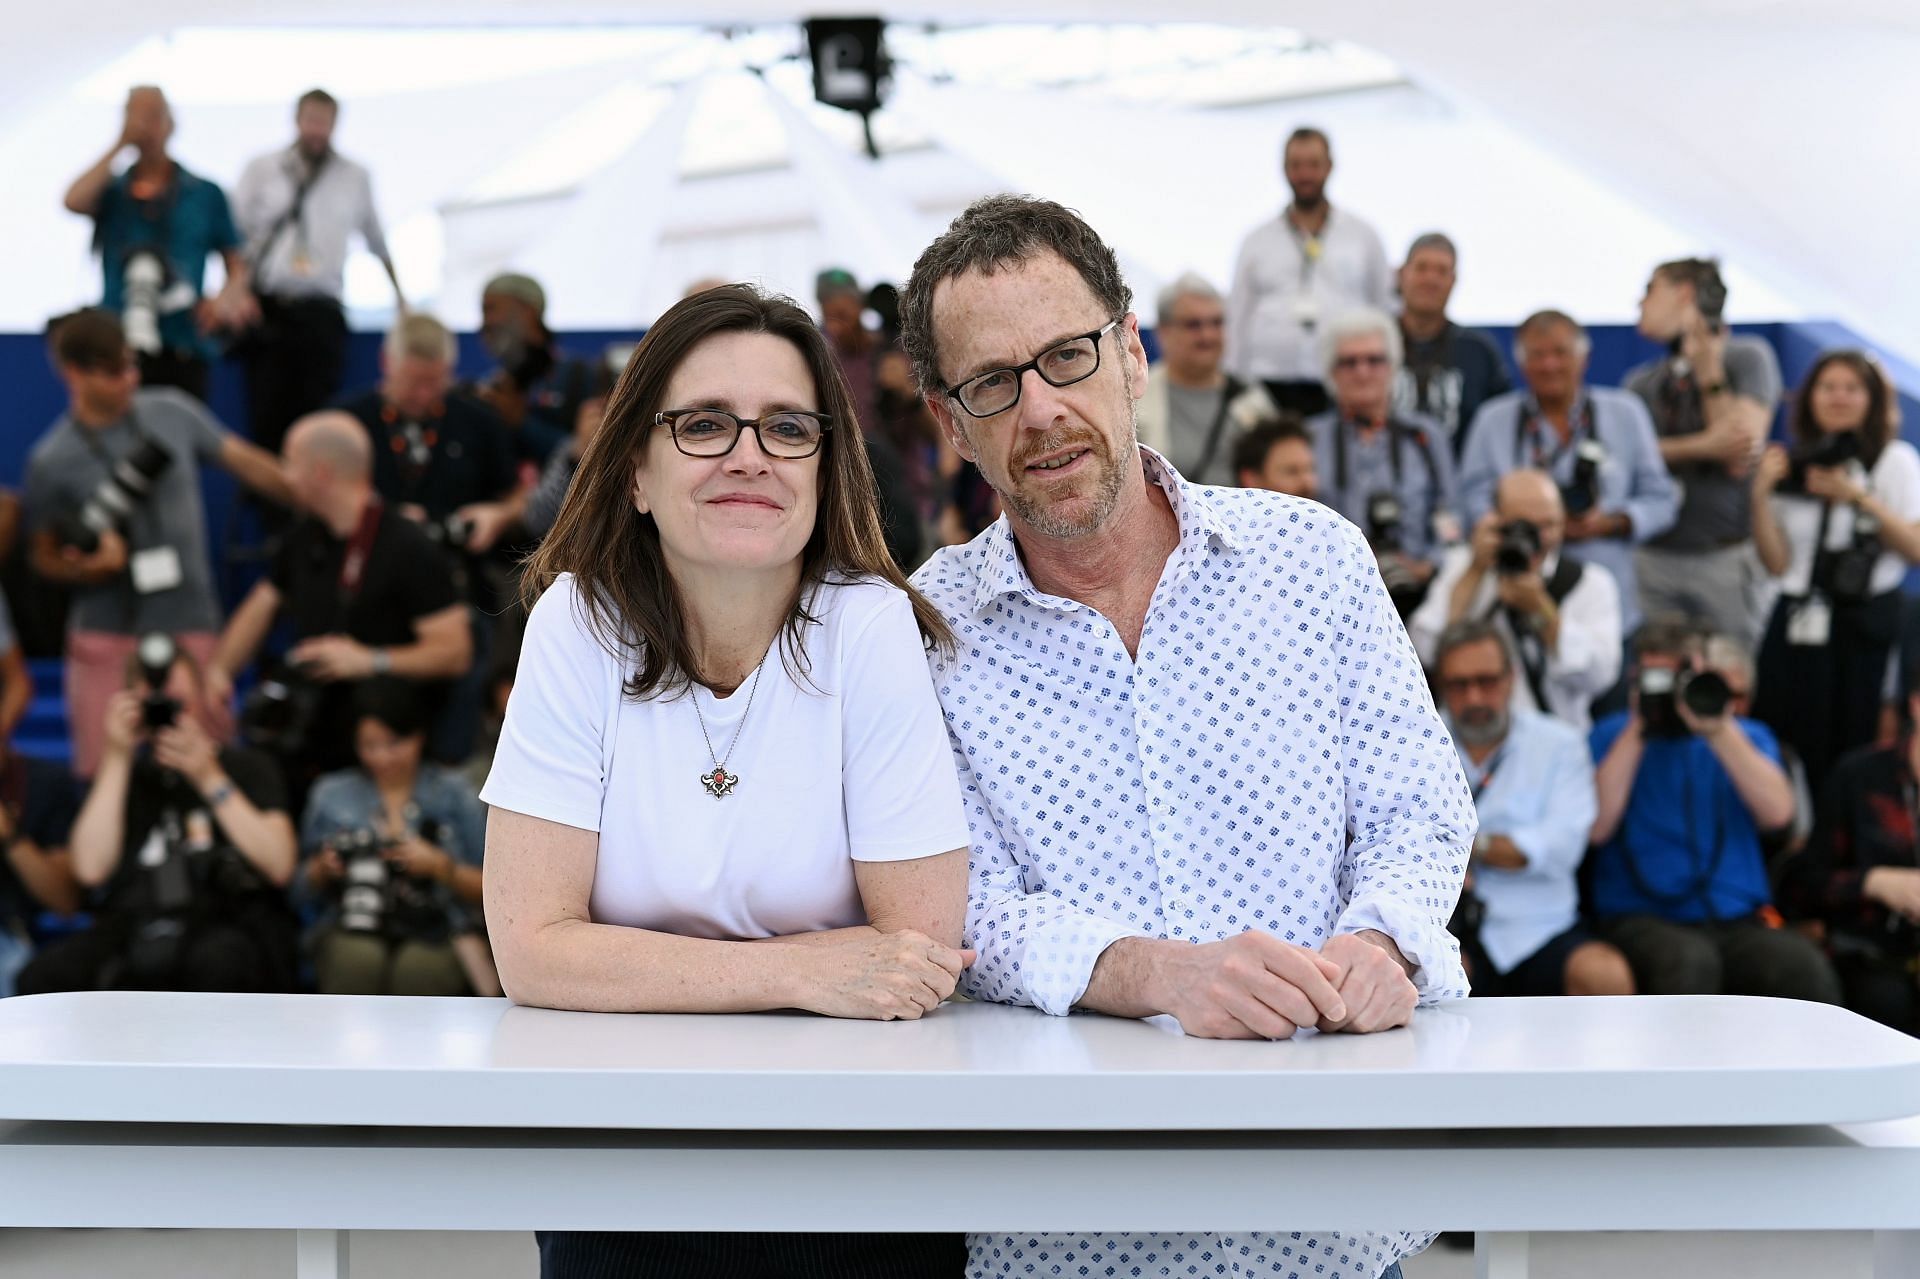 Tricia Cooke and Ethan Coen at the 75th Annual Cannes Film Festival (image via Getty)